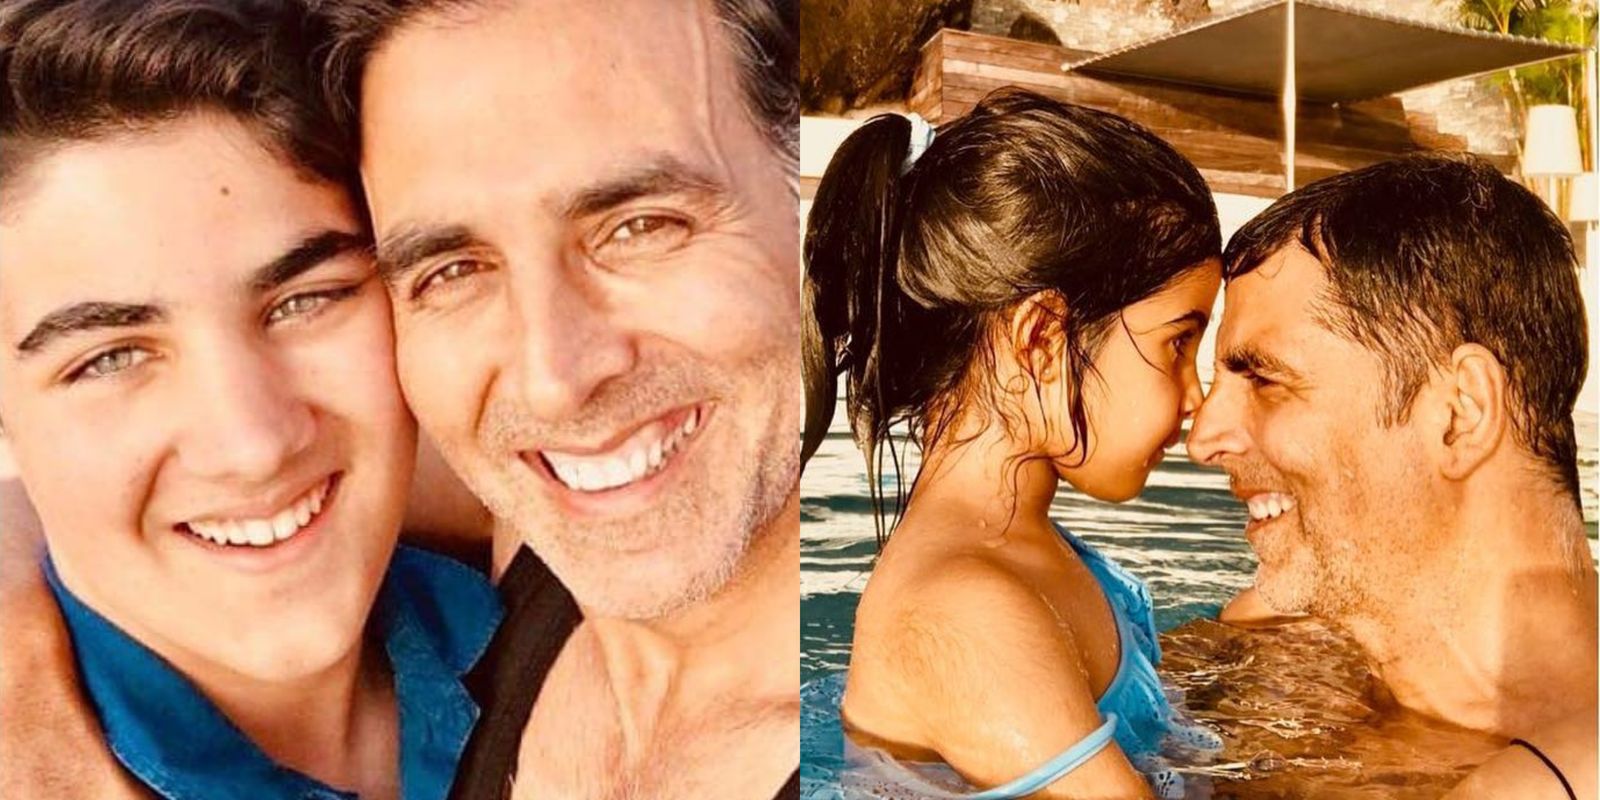 Akshay Kumar Says His Son Aarav Gives Him Feedback On His Films, Daughter Nitara Is Not Bothered About What He Does